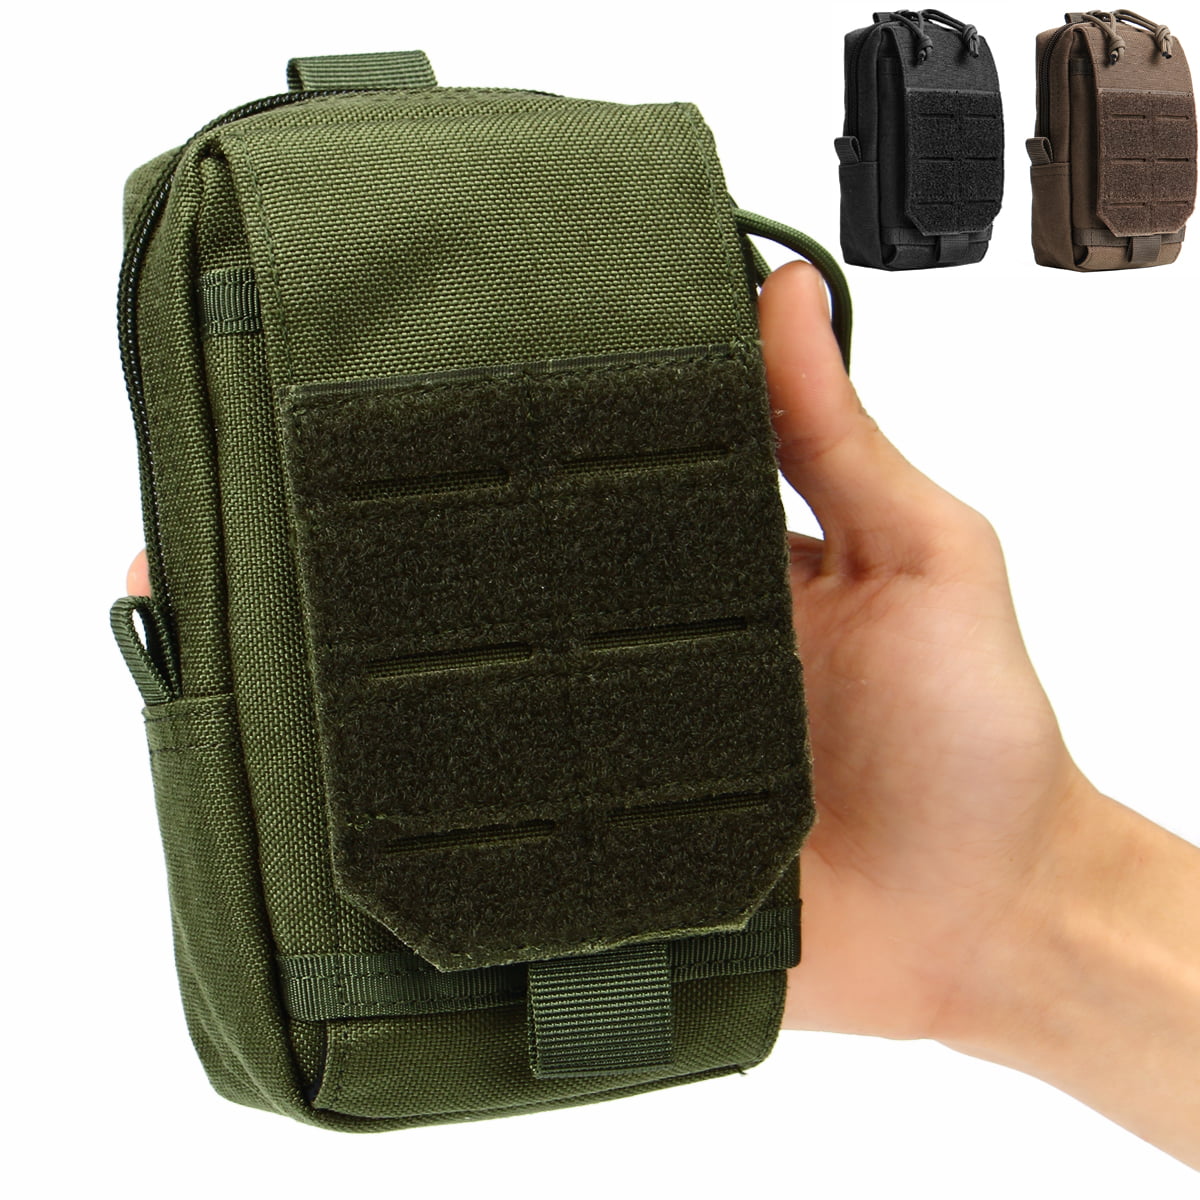 Outdoor Tactical Molle Waist Pack Fanny Phone Pouch Belt Bag Camping Hiking Bag 